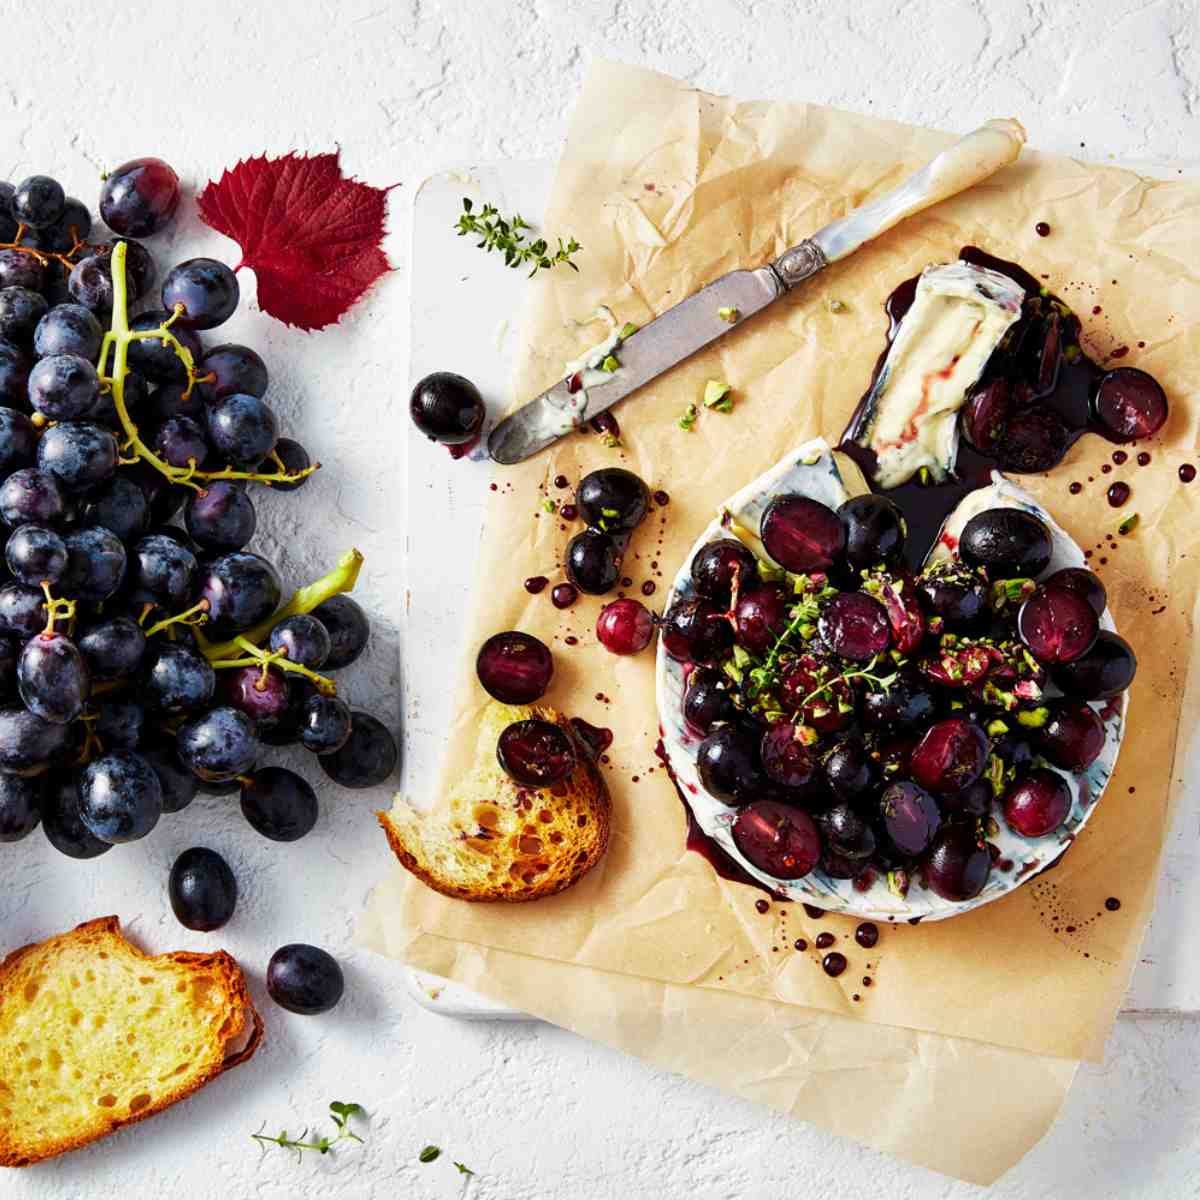 A round of brie topped with grapes, chili flakes and honey with more grapes on the side.